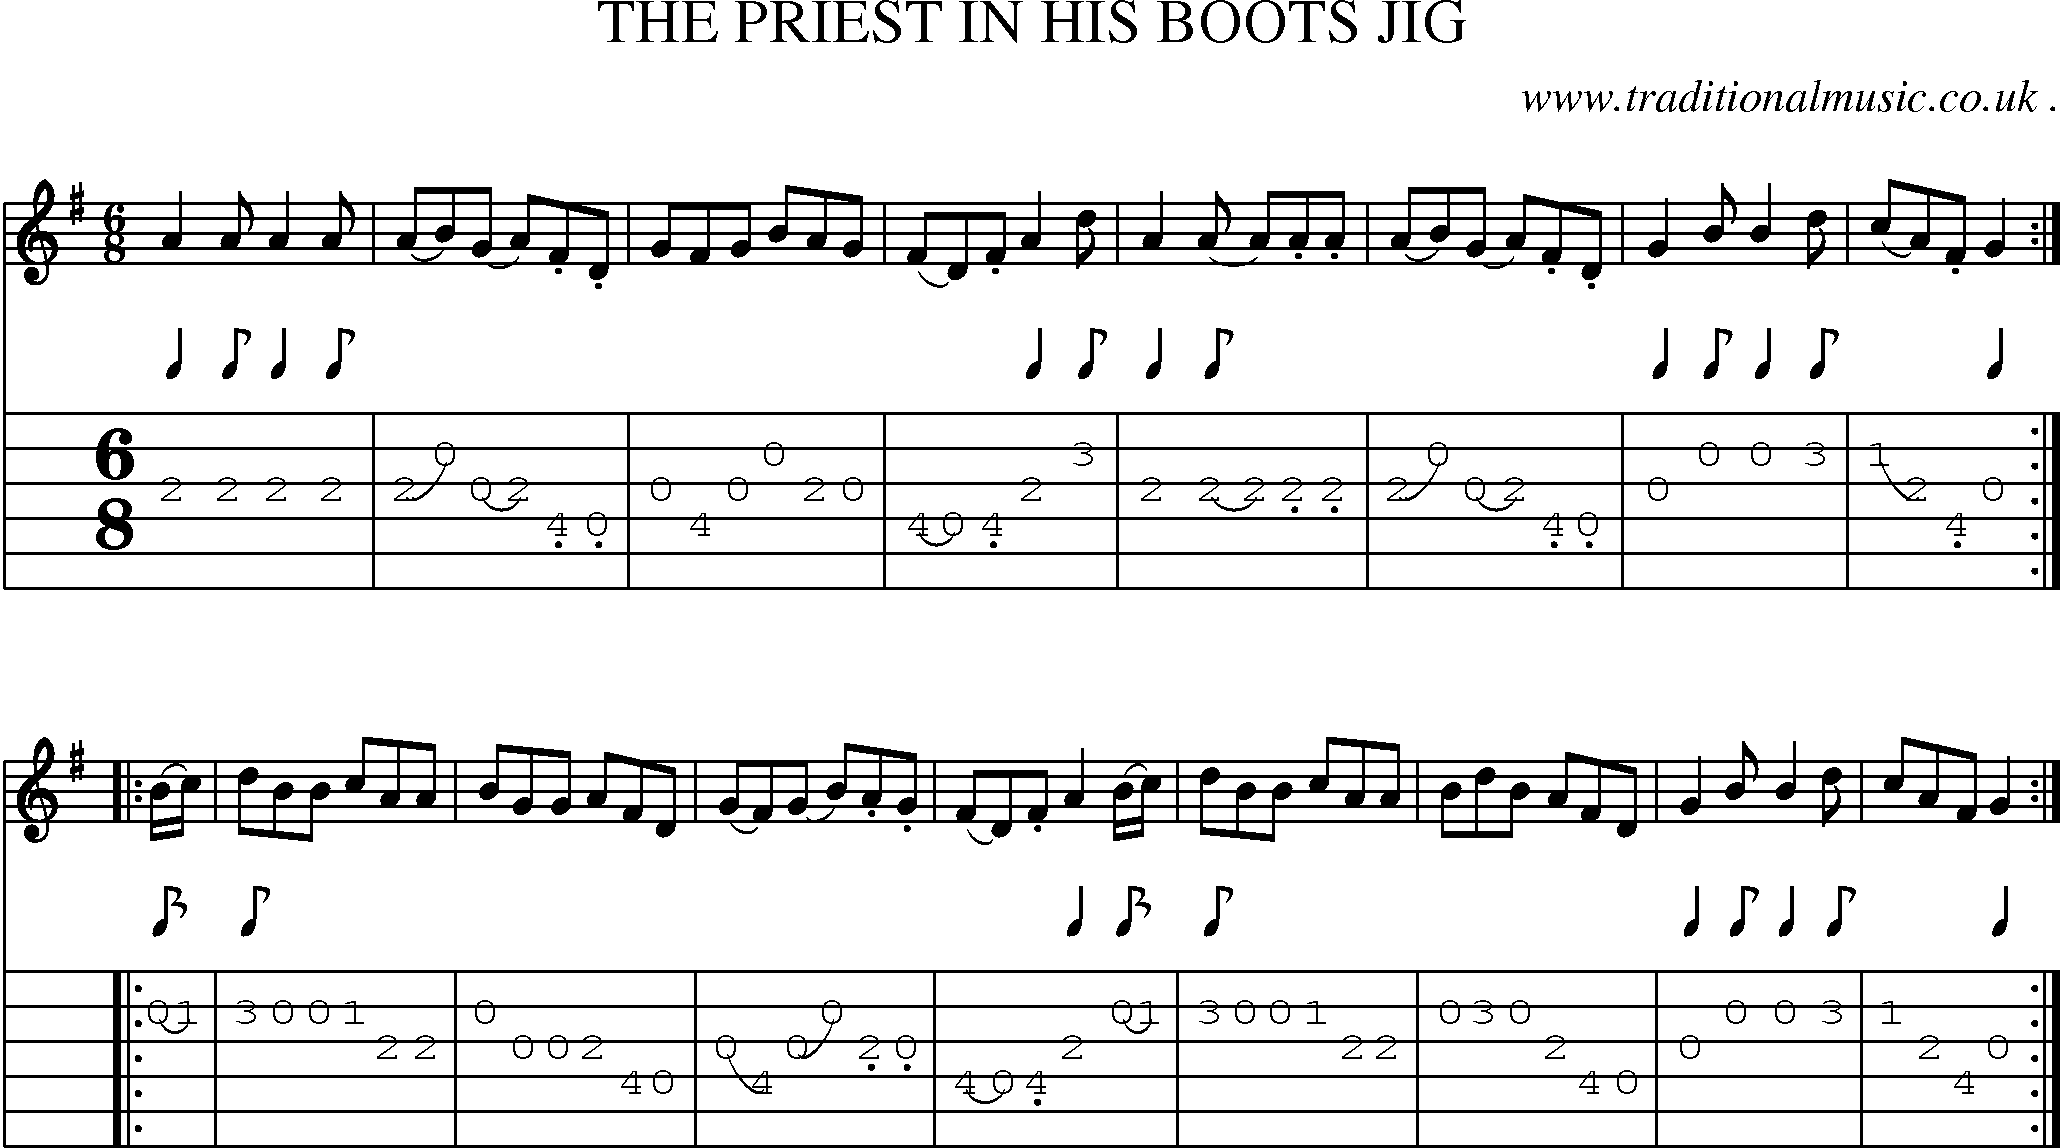 Sheet-Music and Guitar Tabs for The Priest In His Boots Jig